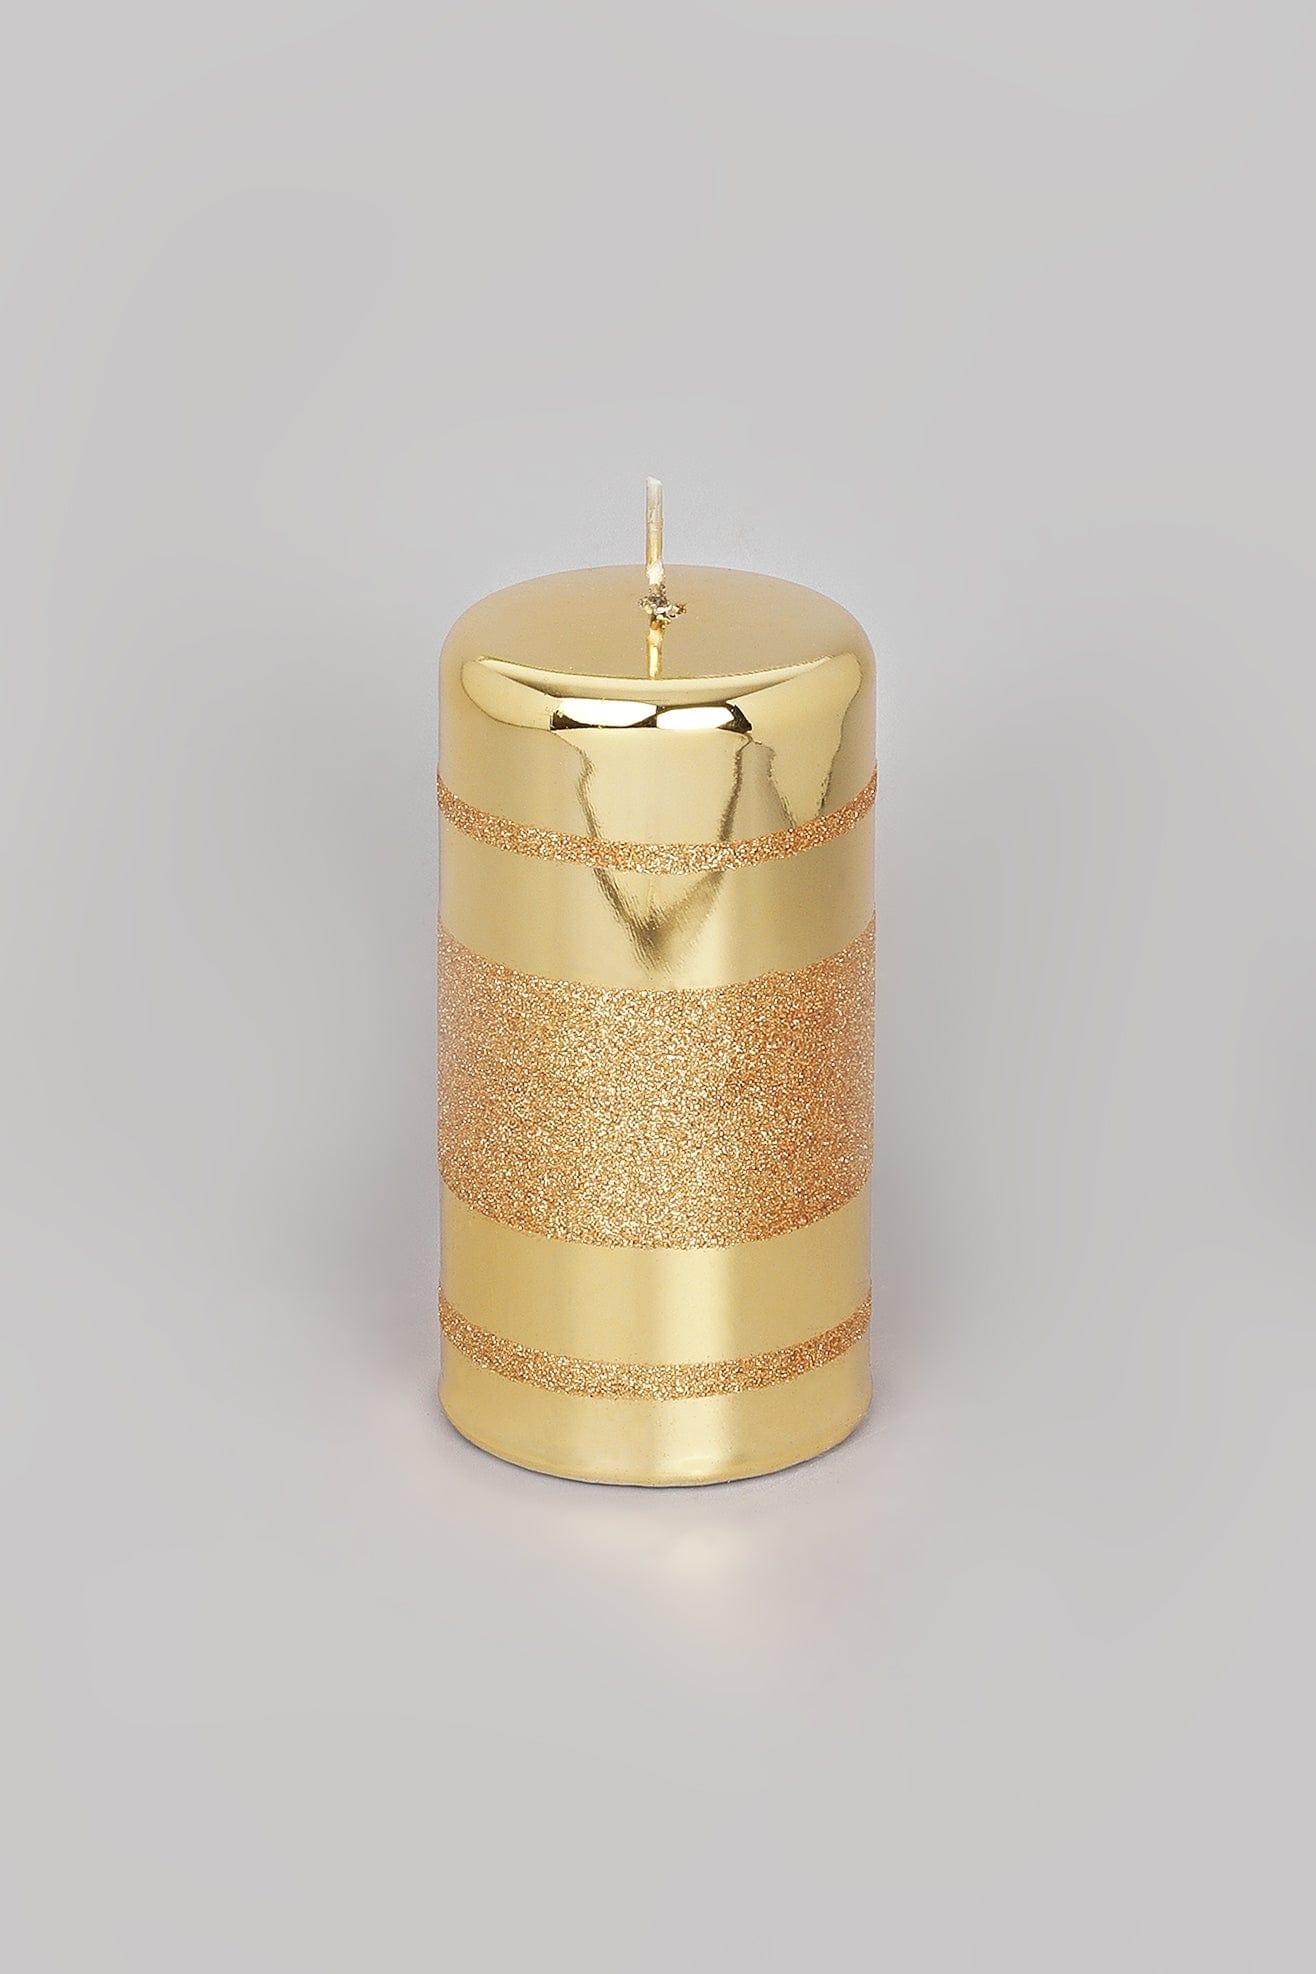 G Decor Candles & Candle Holders Gold / Large Gold Glass Effect Striped Glitter Gloss Ball Pillar Candles